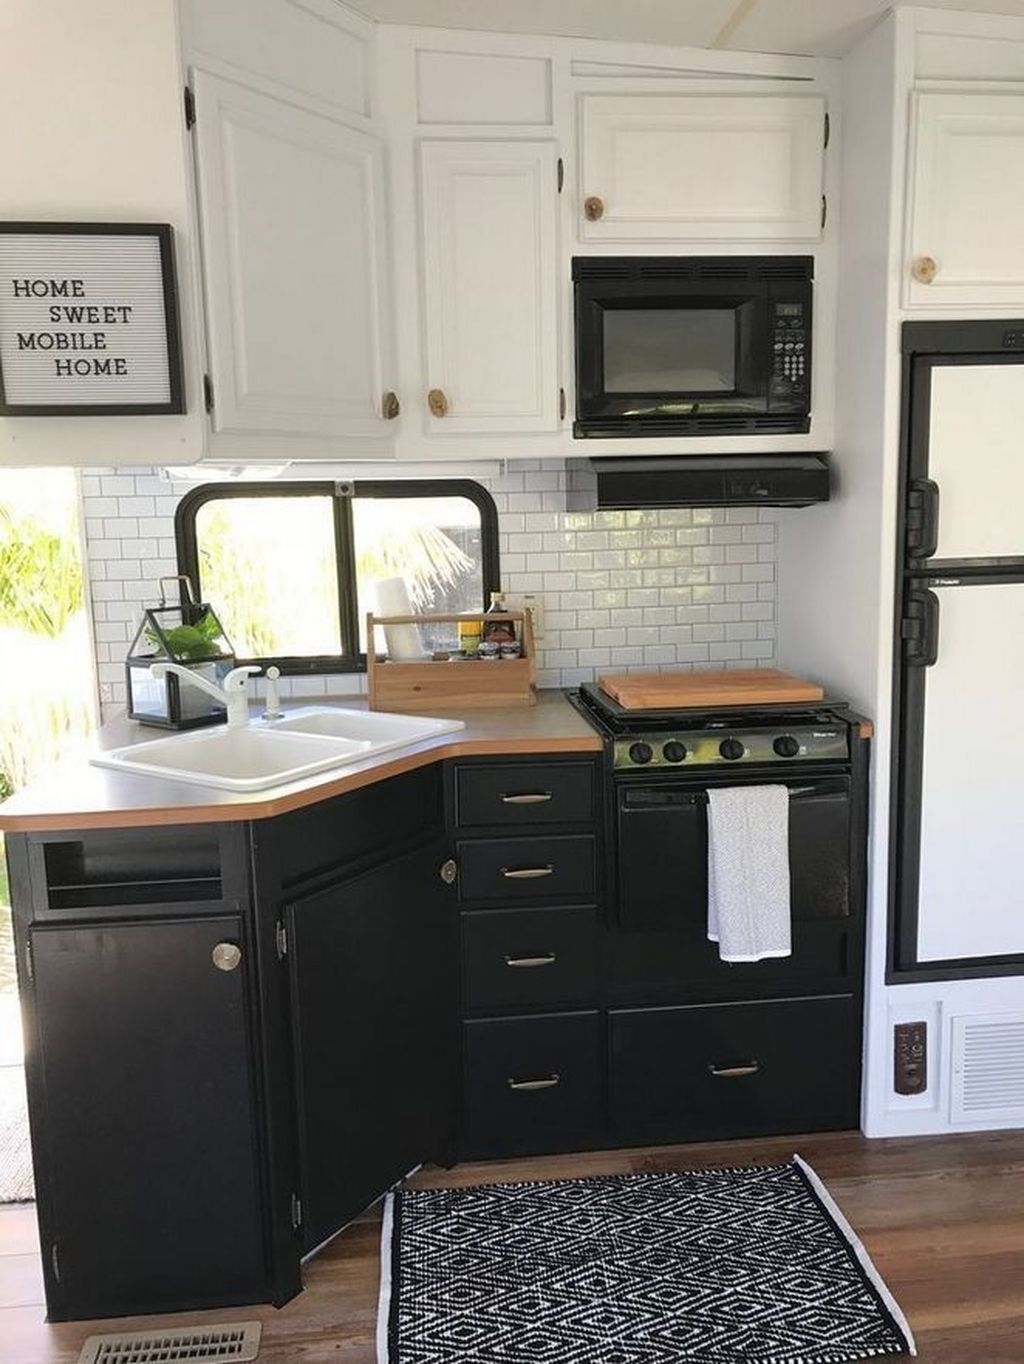 Best RV Kitchen Storage Ideas For Cozy Cook When The Camping 10